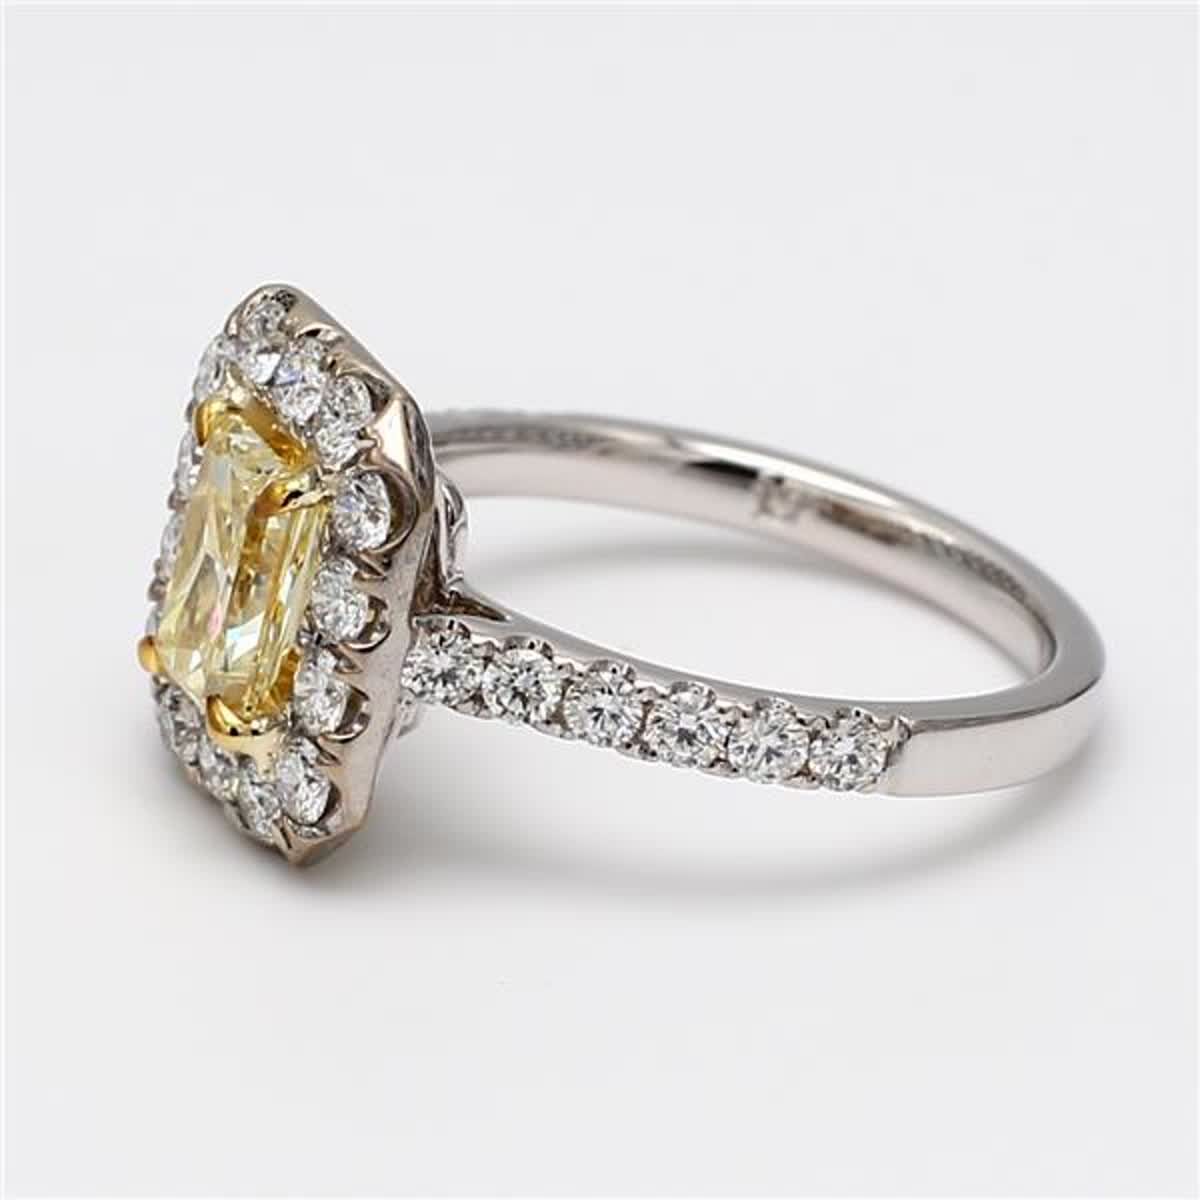 Natural Yellow Radiant and White Diamond 1.52 Carat TW Gold Cocktail Ring